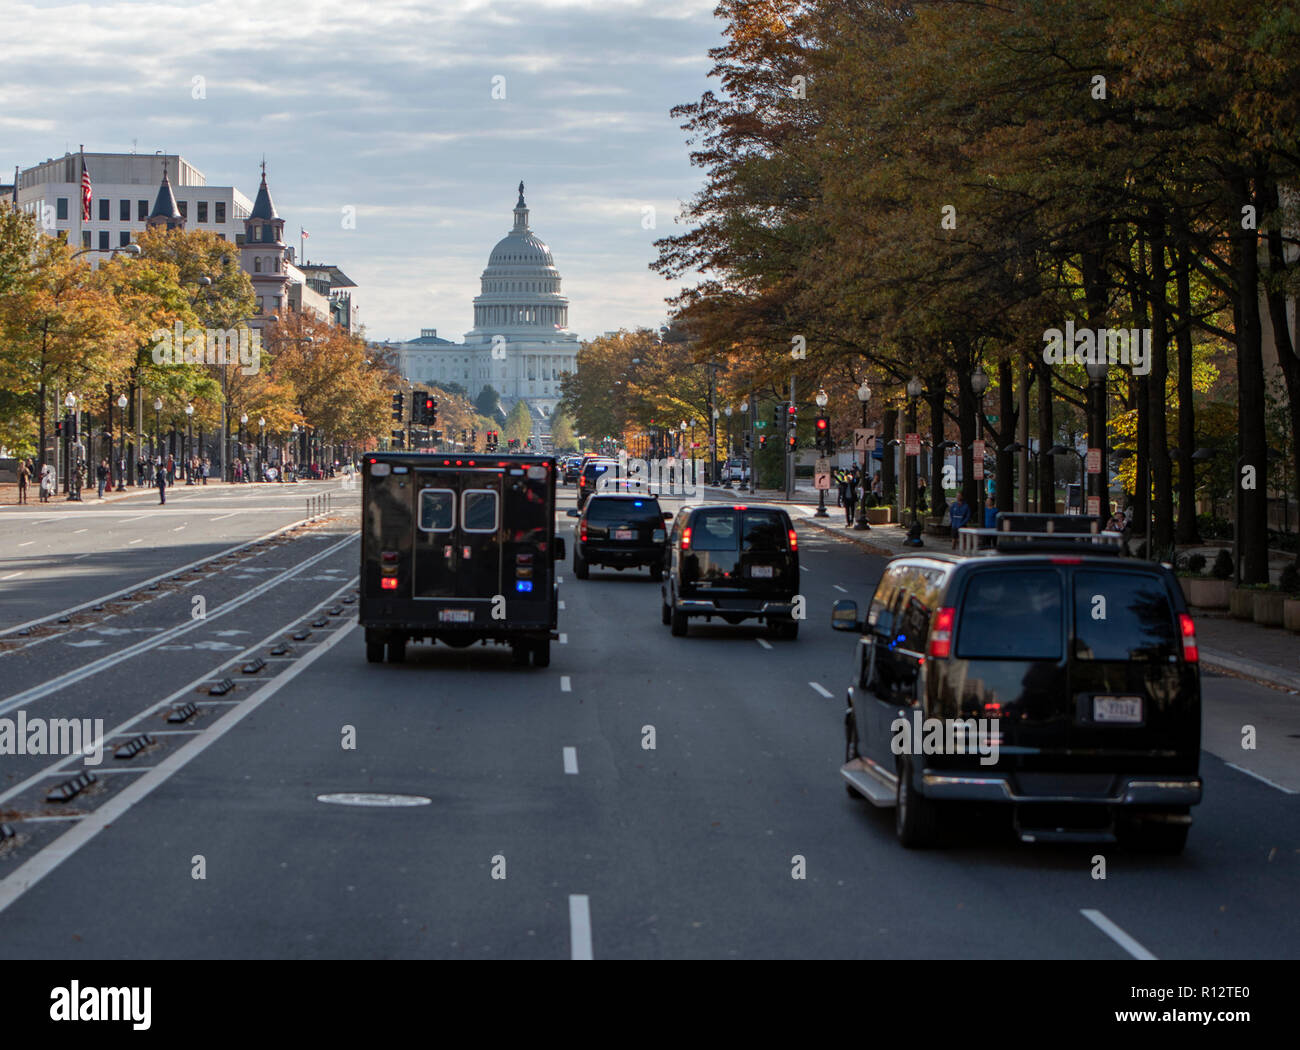 The presidential motorcade with United States President Donald J. Trump and First lady Melania Trump aboard, makes its way up Pennsylvania Avenue to the Supreme Court of the US in Washington, DC for the investiture of Associate Justice of the Supreme Court Brett Kavanaugh on Thursday, November 8, 2018. Credit: Ron Sachs/Pool via CNP /MediaPunch Stock Photo